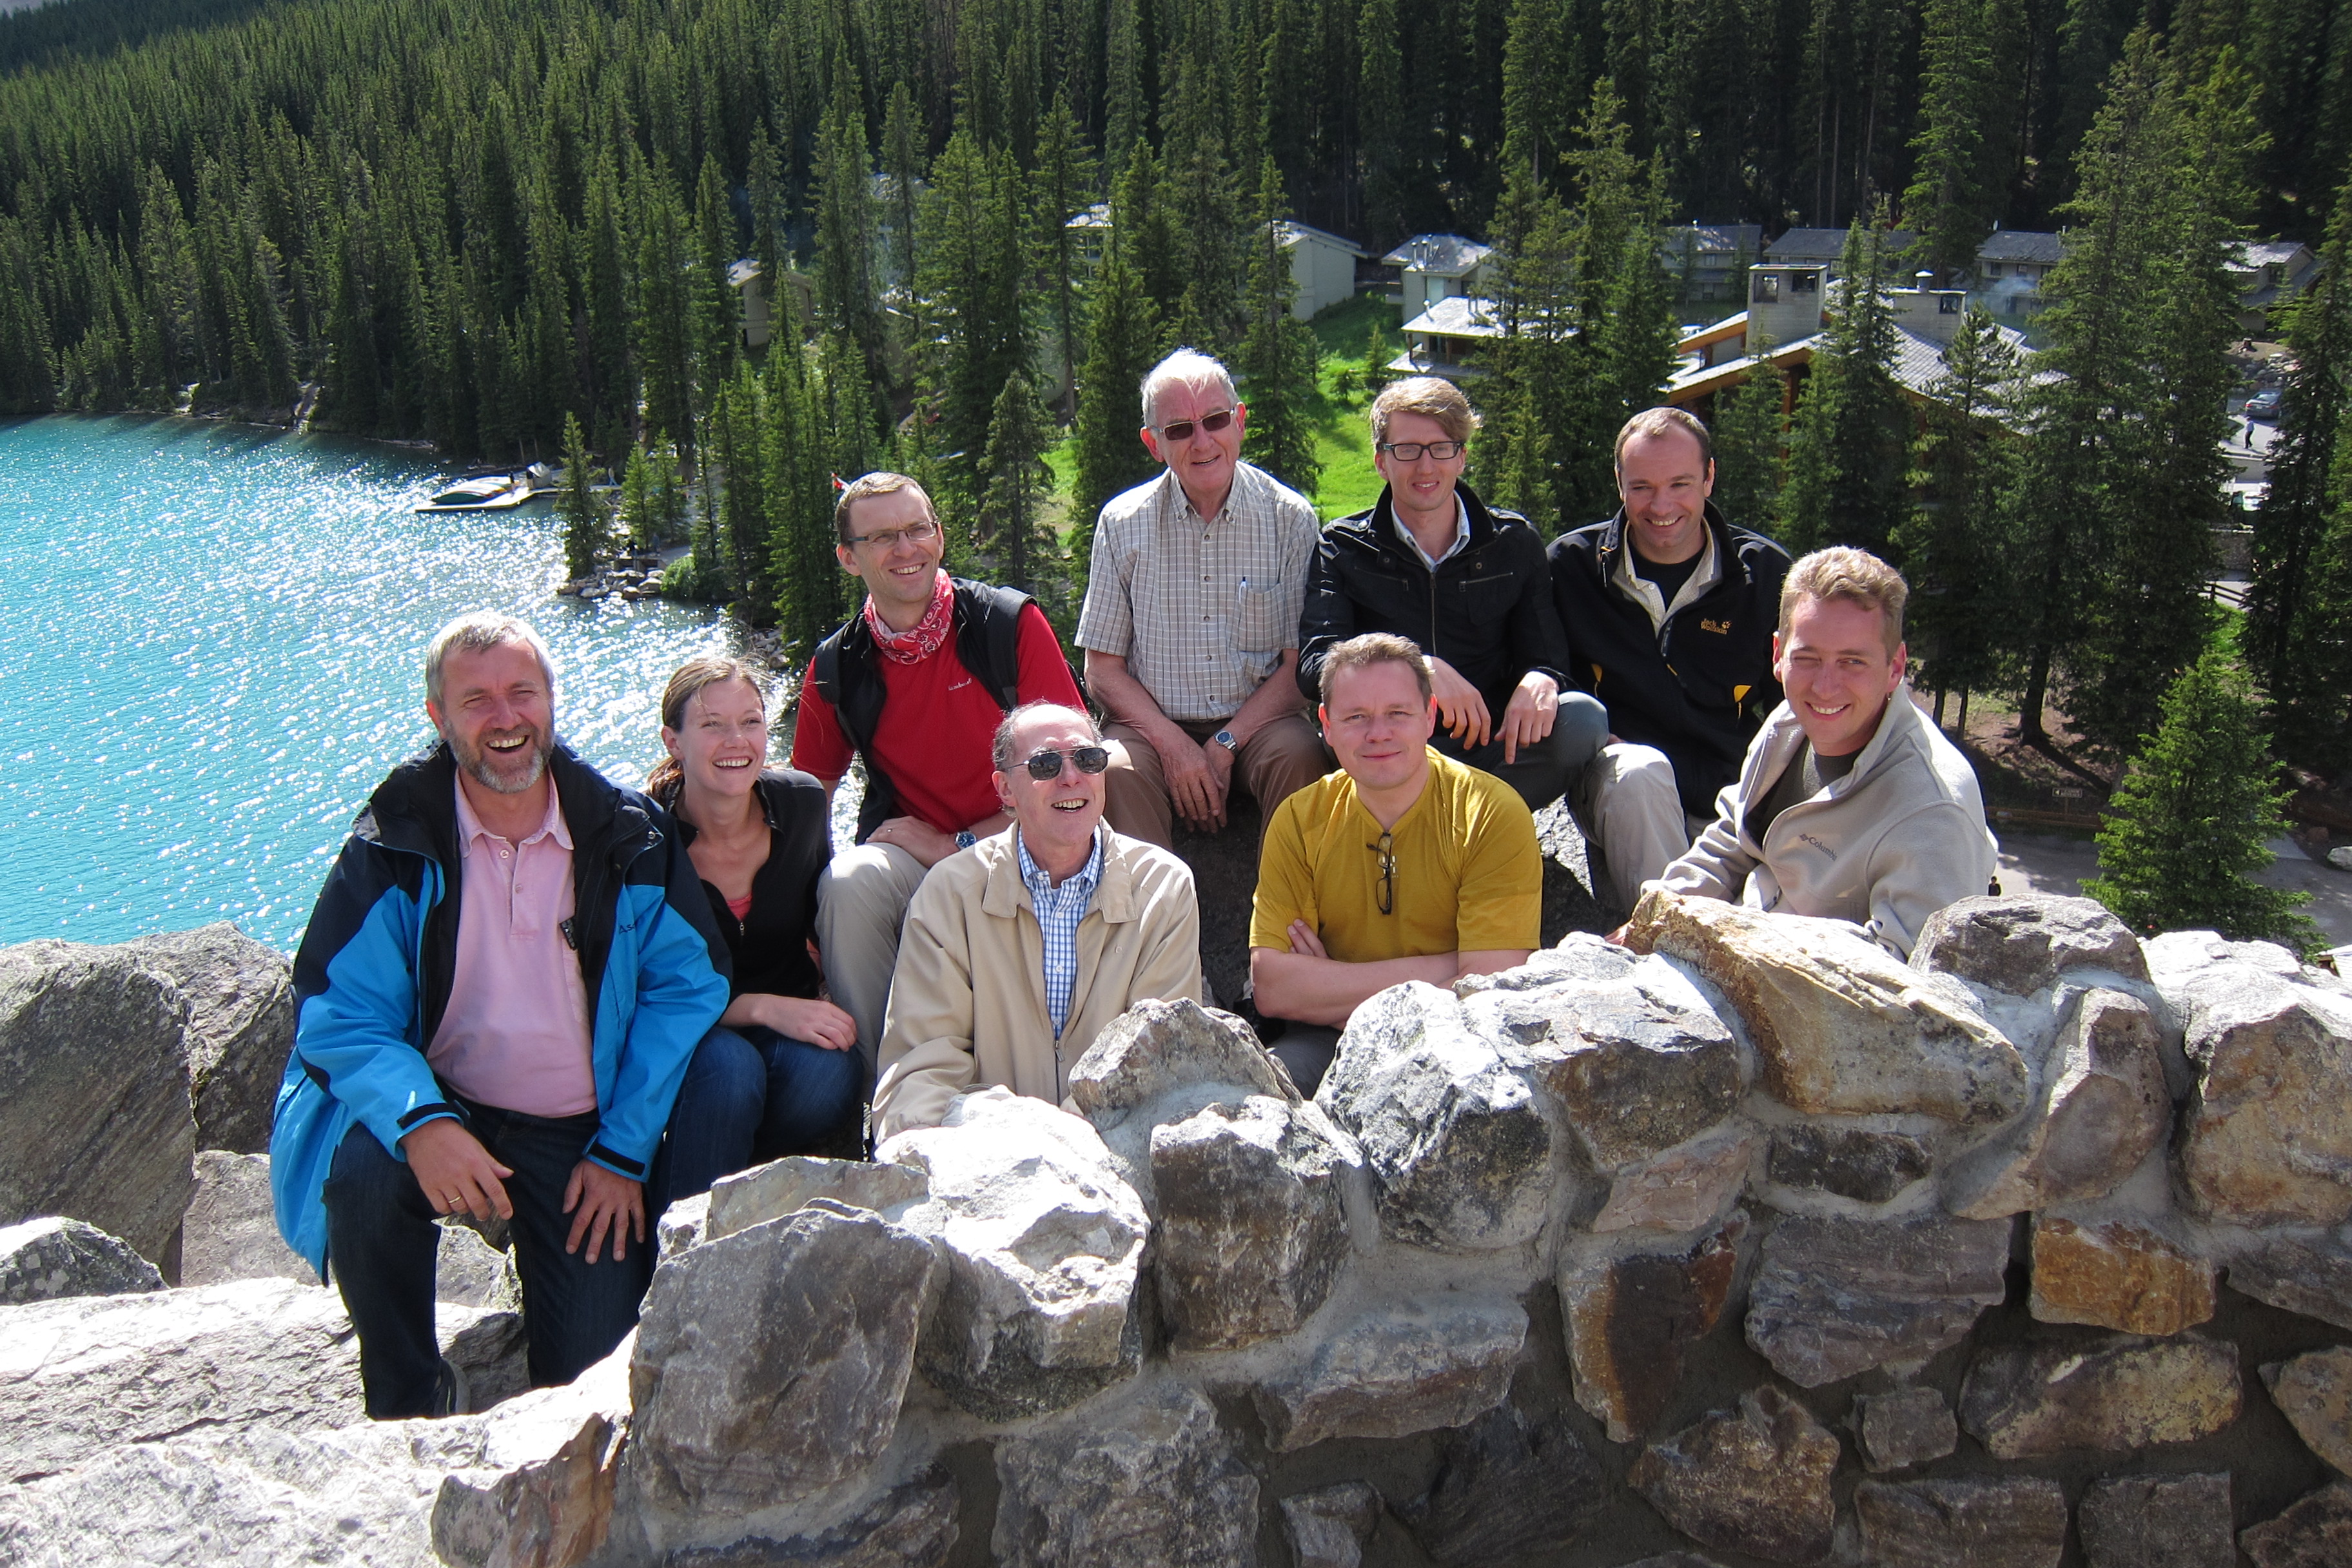 Members of the Atomic Weights Commission at the 2011 biennial meeting in Canada